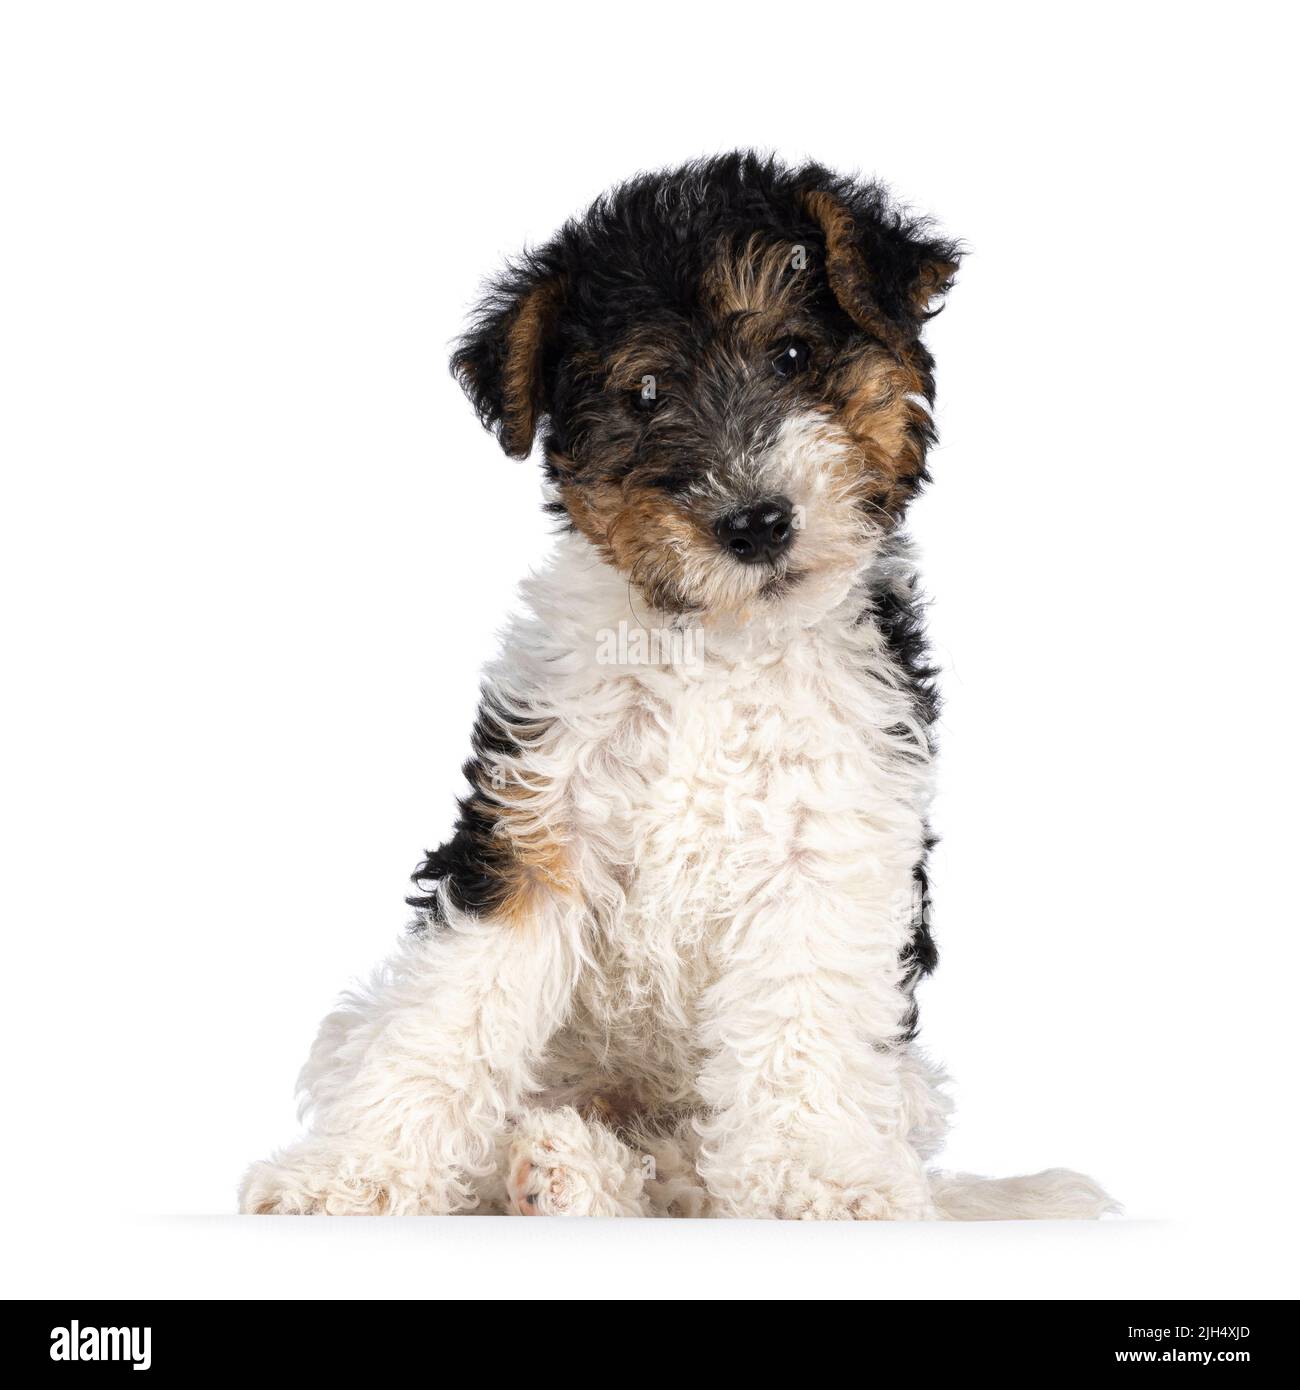 Cute Fox Terrier dog pup, sitting cool with head tilted. Looking straight towards camera. Isolated on a white background. Stock Photo